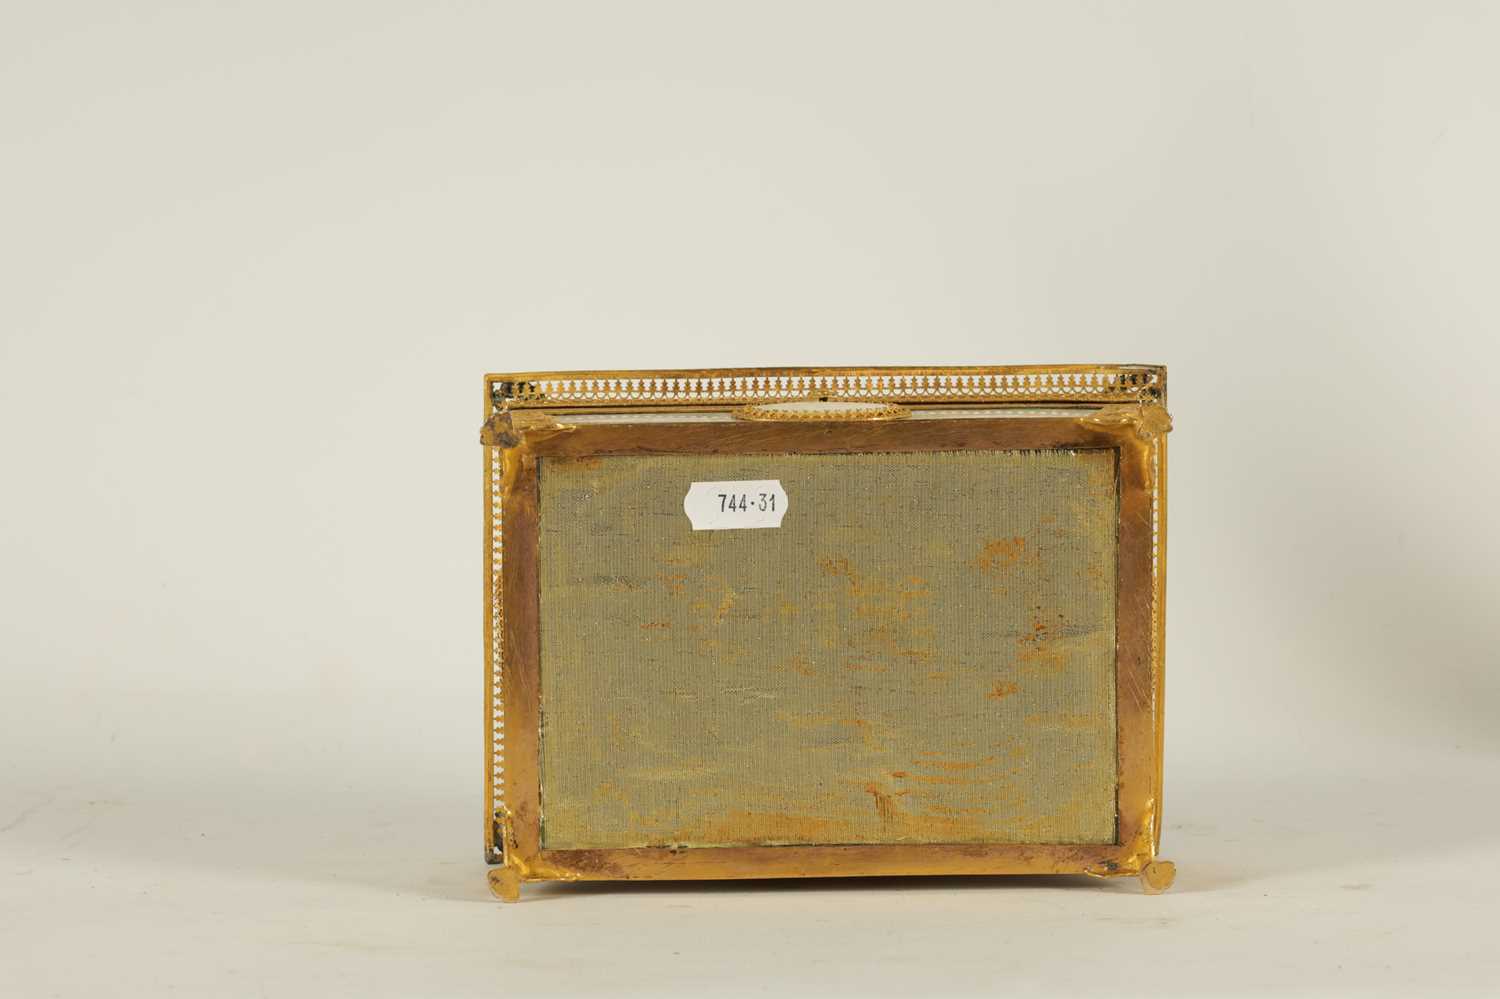 A FINE 19TH CENTURY FRENCH PALAIS ROYAL MOTHER OF PEARL AND GILT ORMOLU SIX BOTTLE PERFUME CASKET - Image 8 of 8